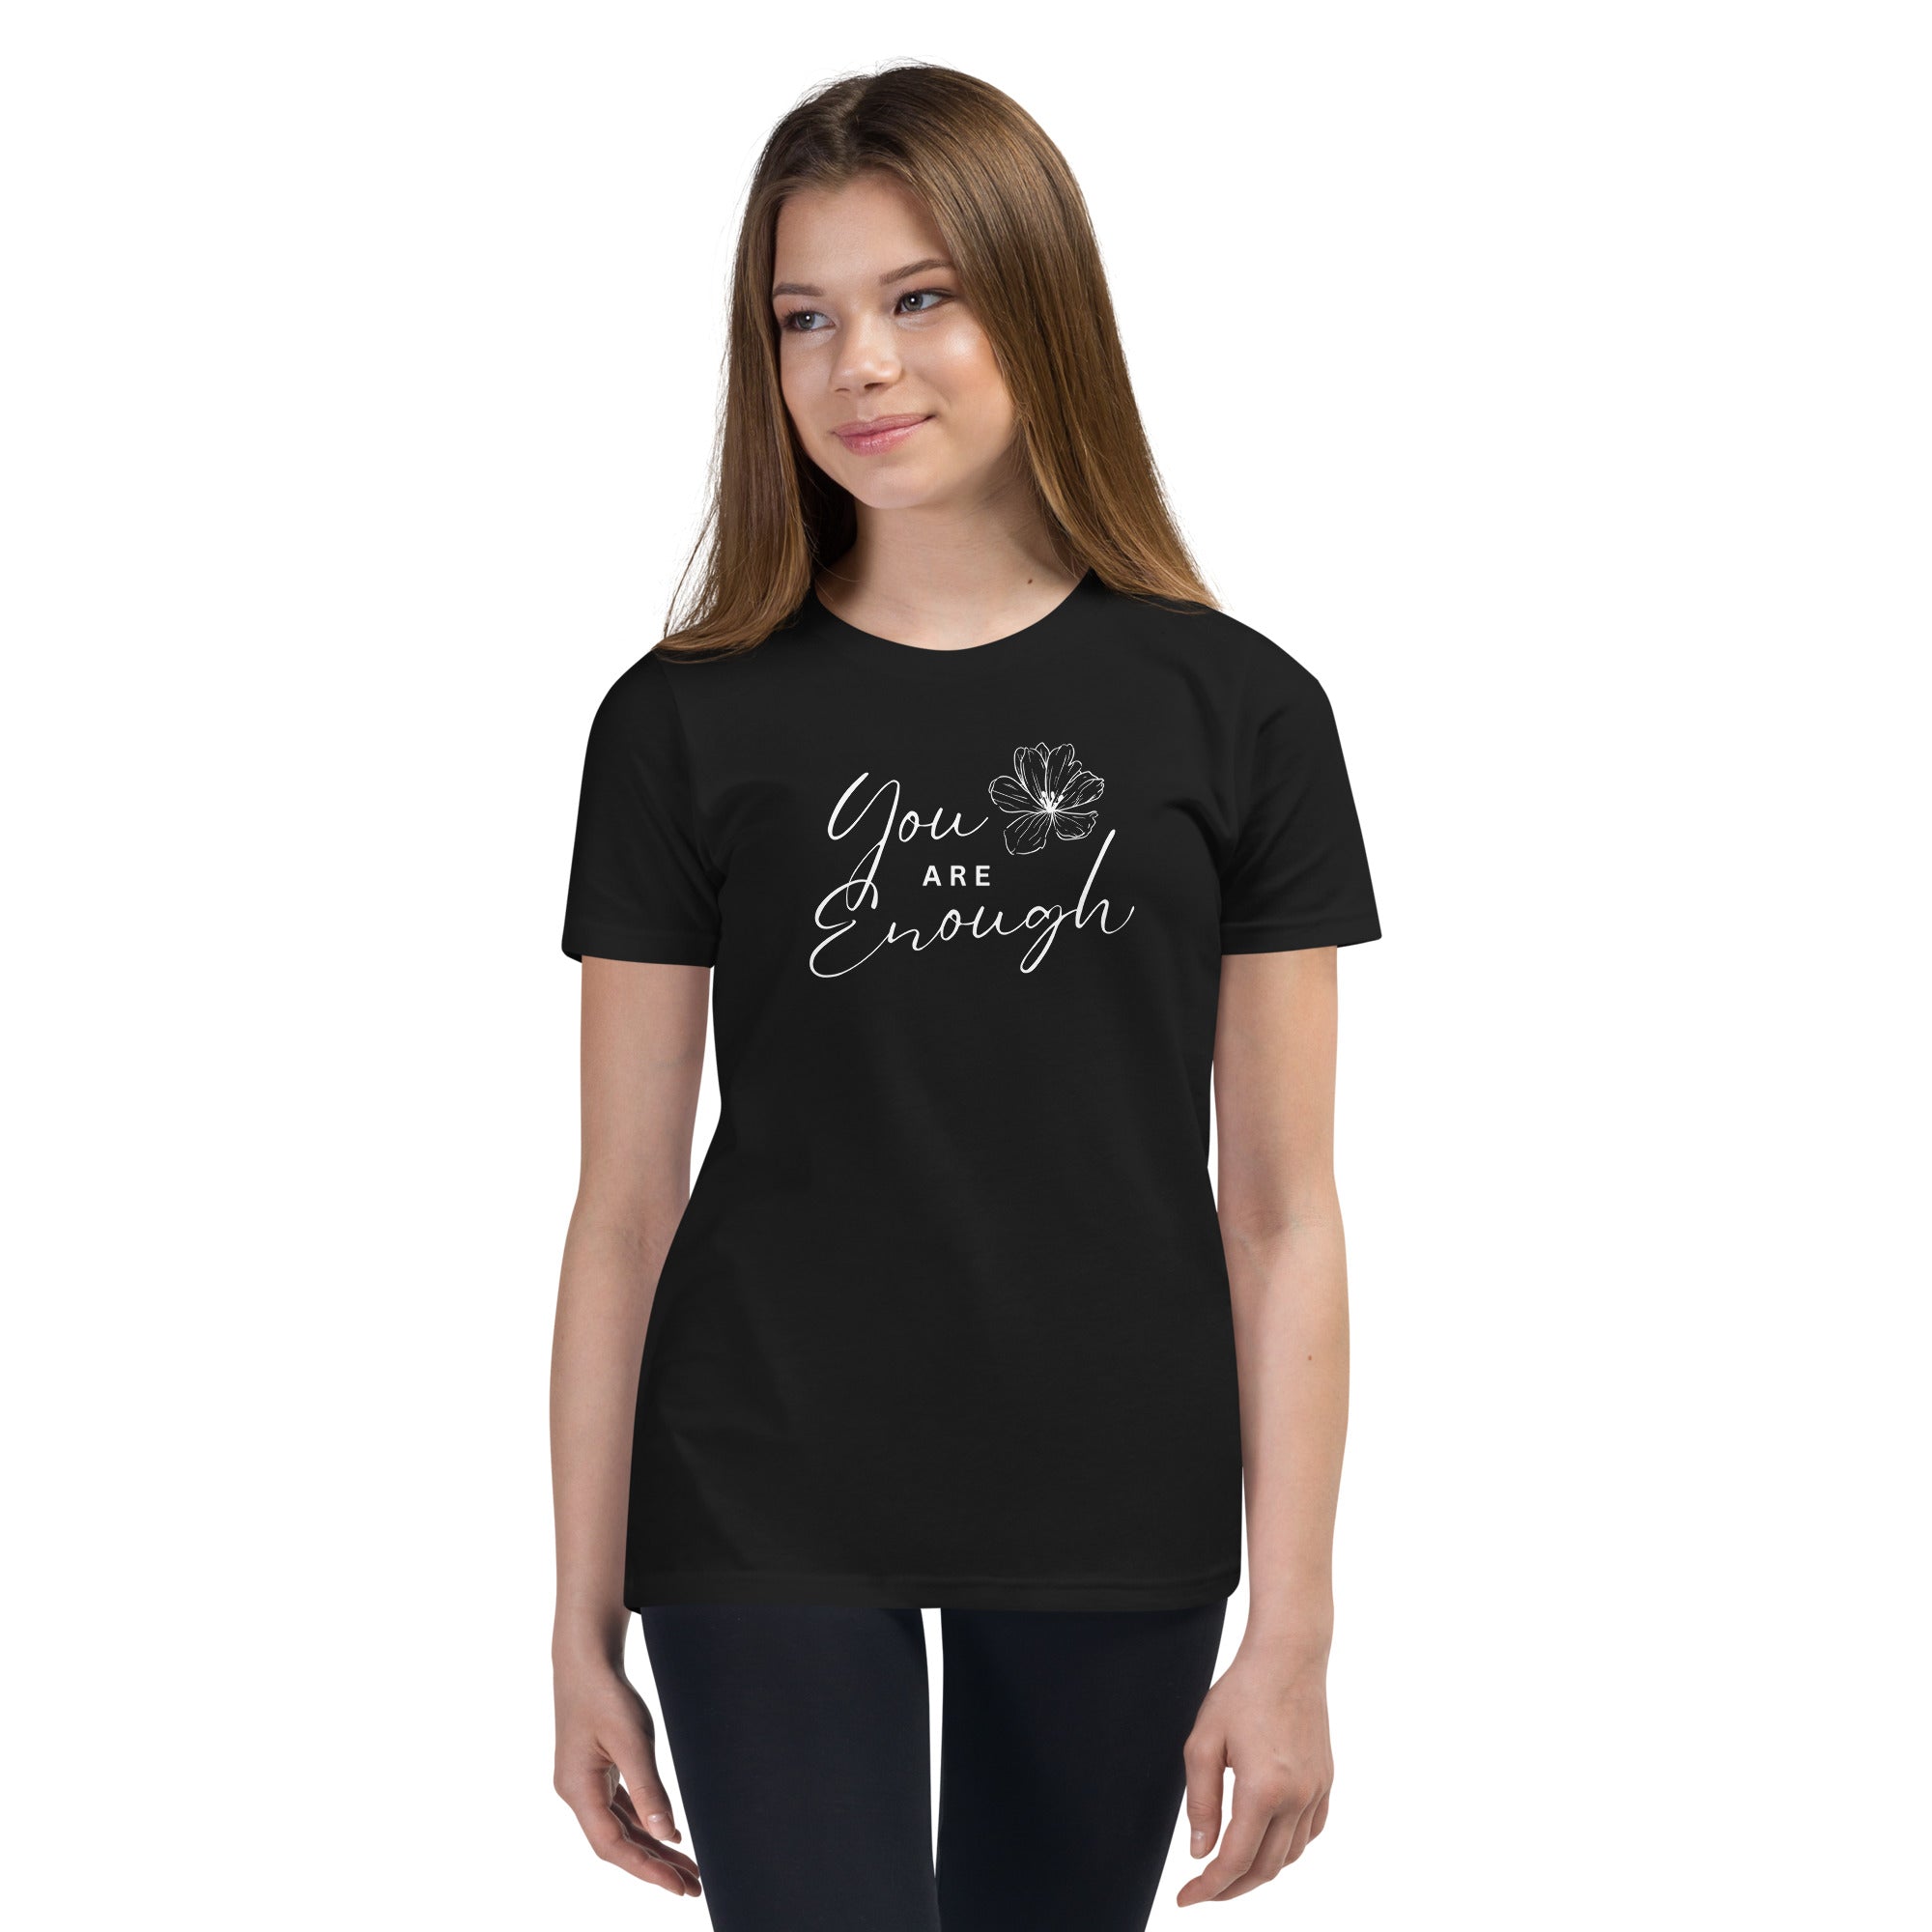 You Are Enough - Youth Short Sleeve T-Shirt